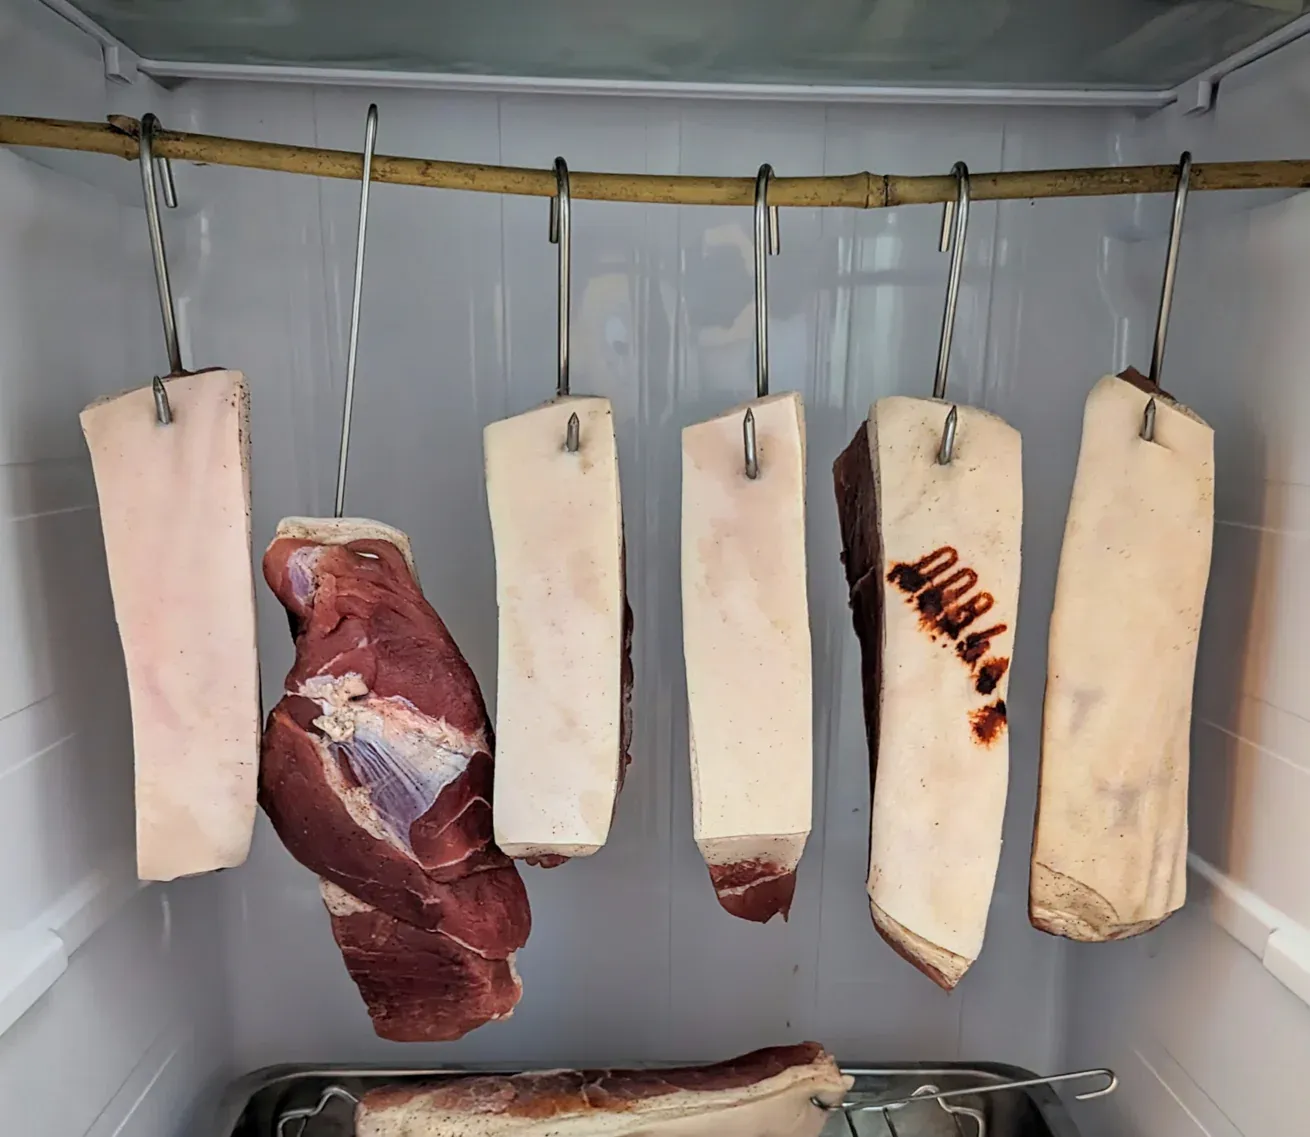 meat drying in the fridge